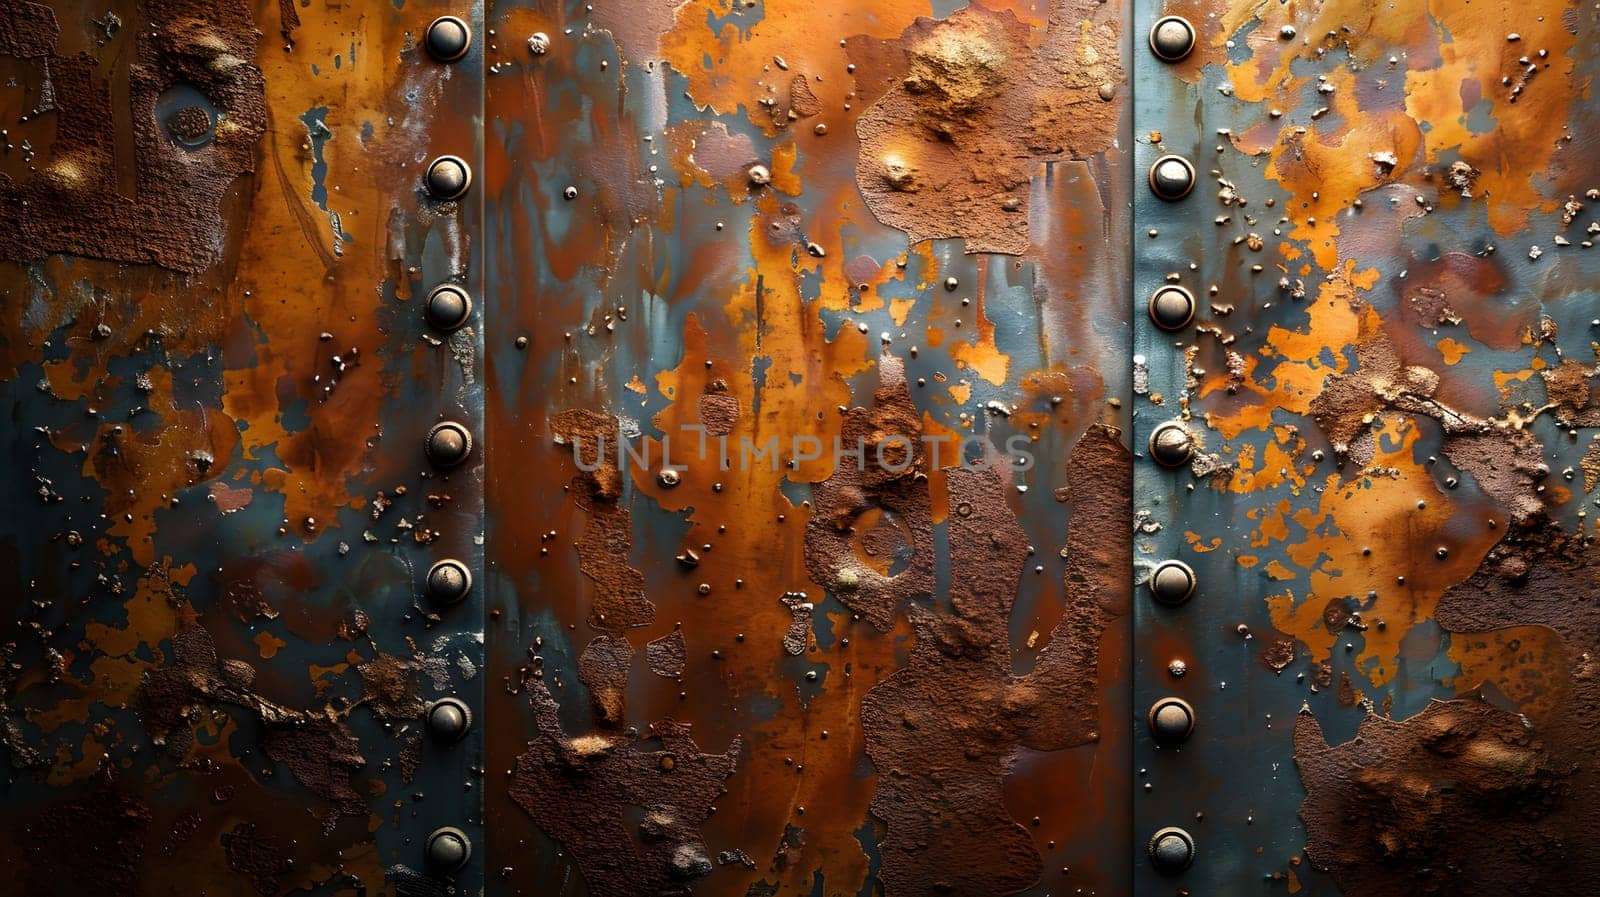 A close up of a brown rusty metal surface with rivets, resembling an art painting. The texture is reminiscent of wood grain, creating a visual arts event on the window of the glass